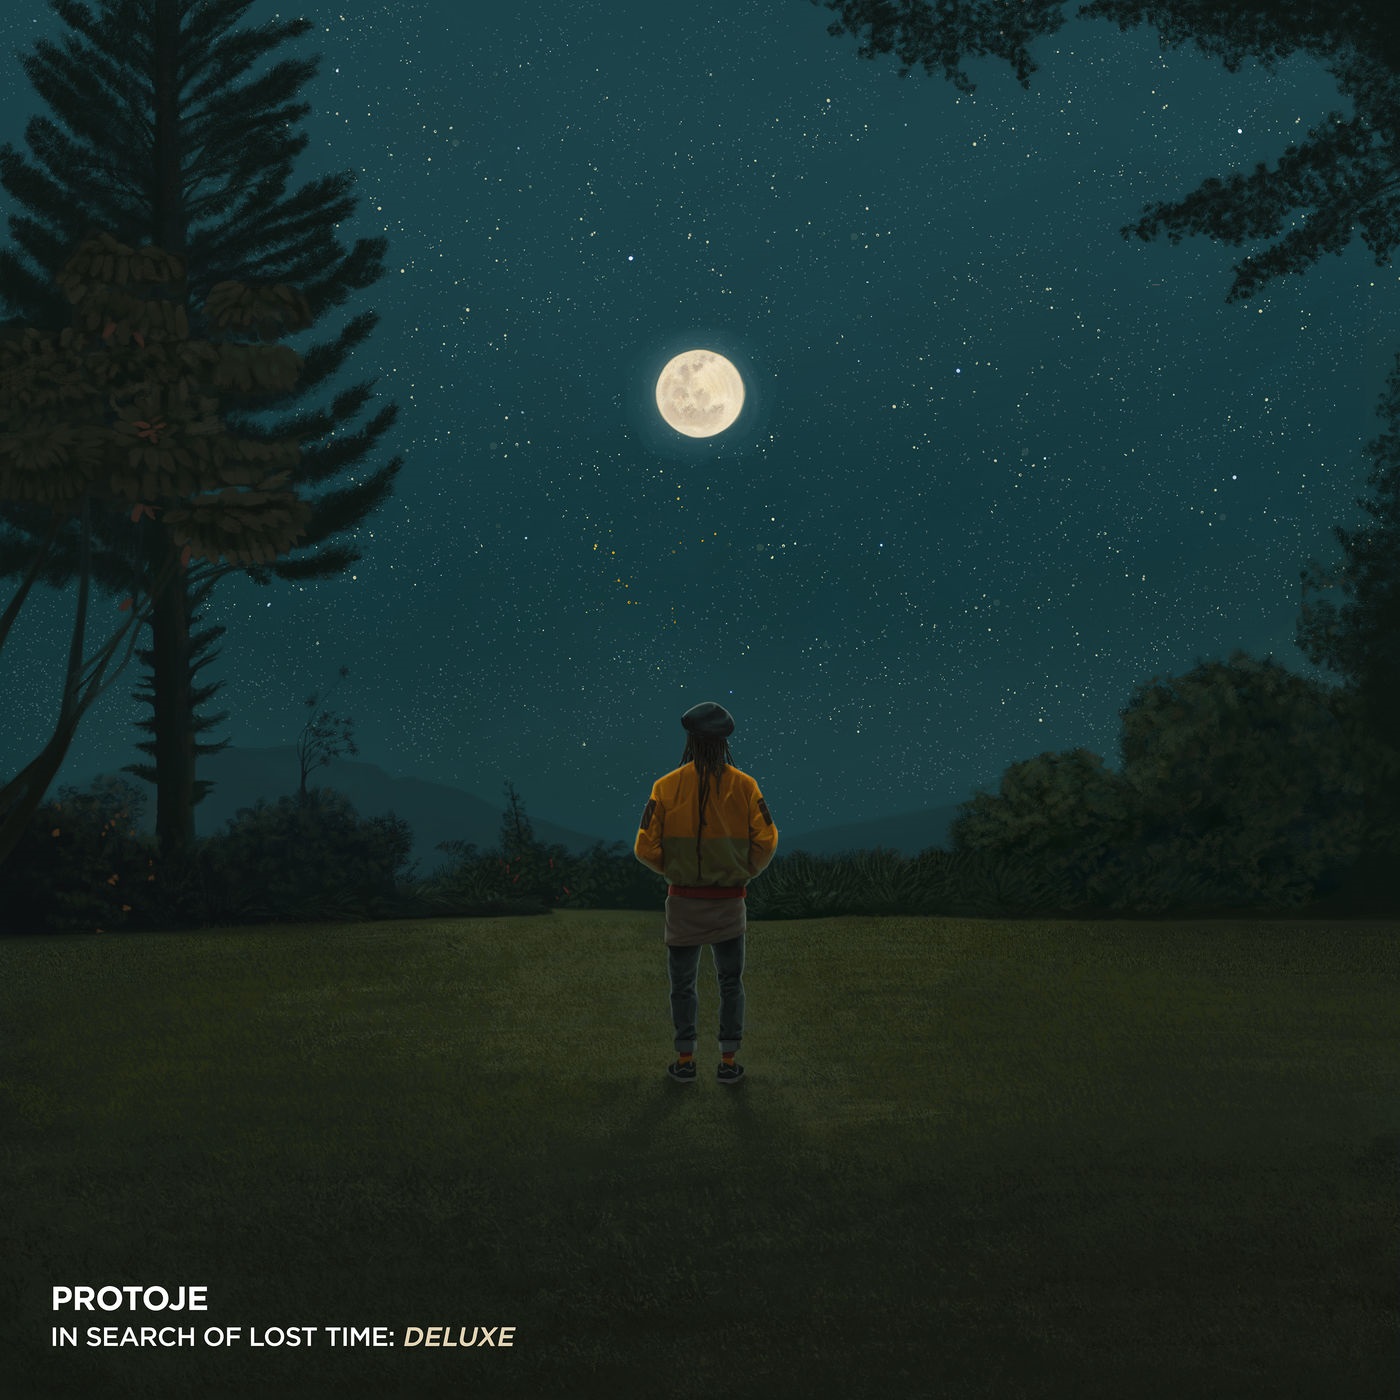 Protoje - In Search of Lost Time (Deluxe Edition) (2020/2021) [FLAC 24bit/48kHz]